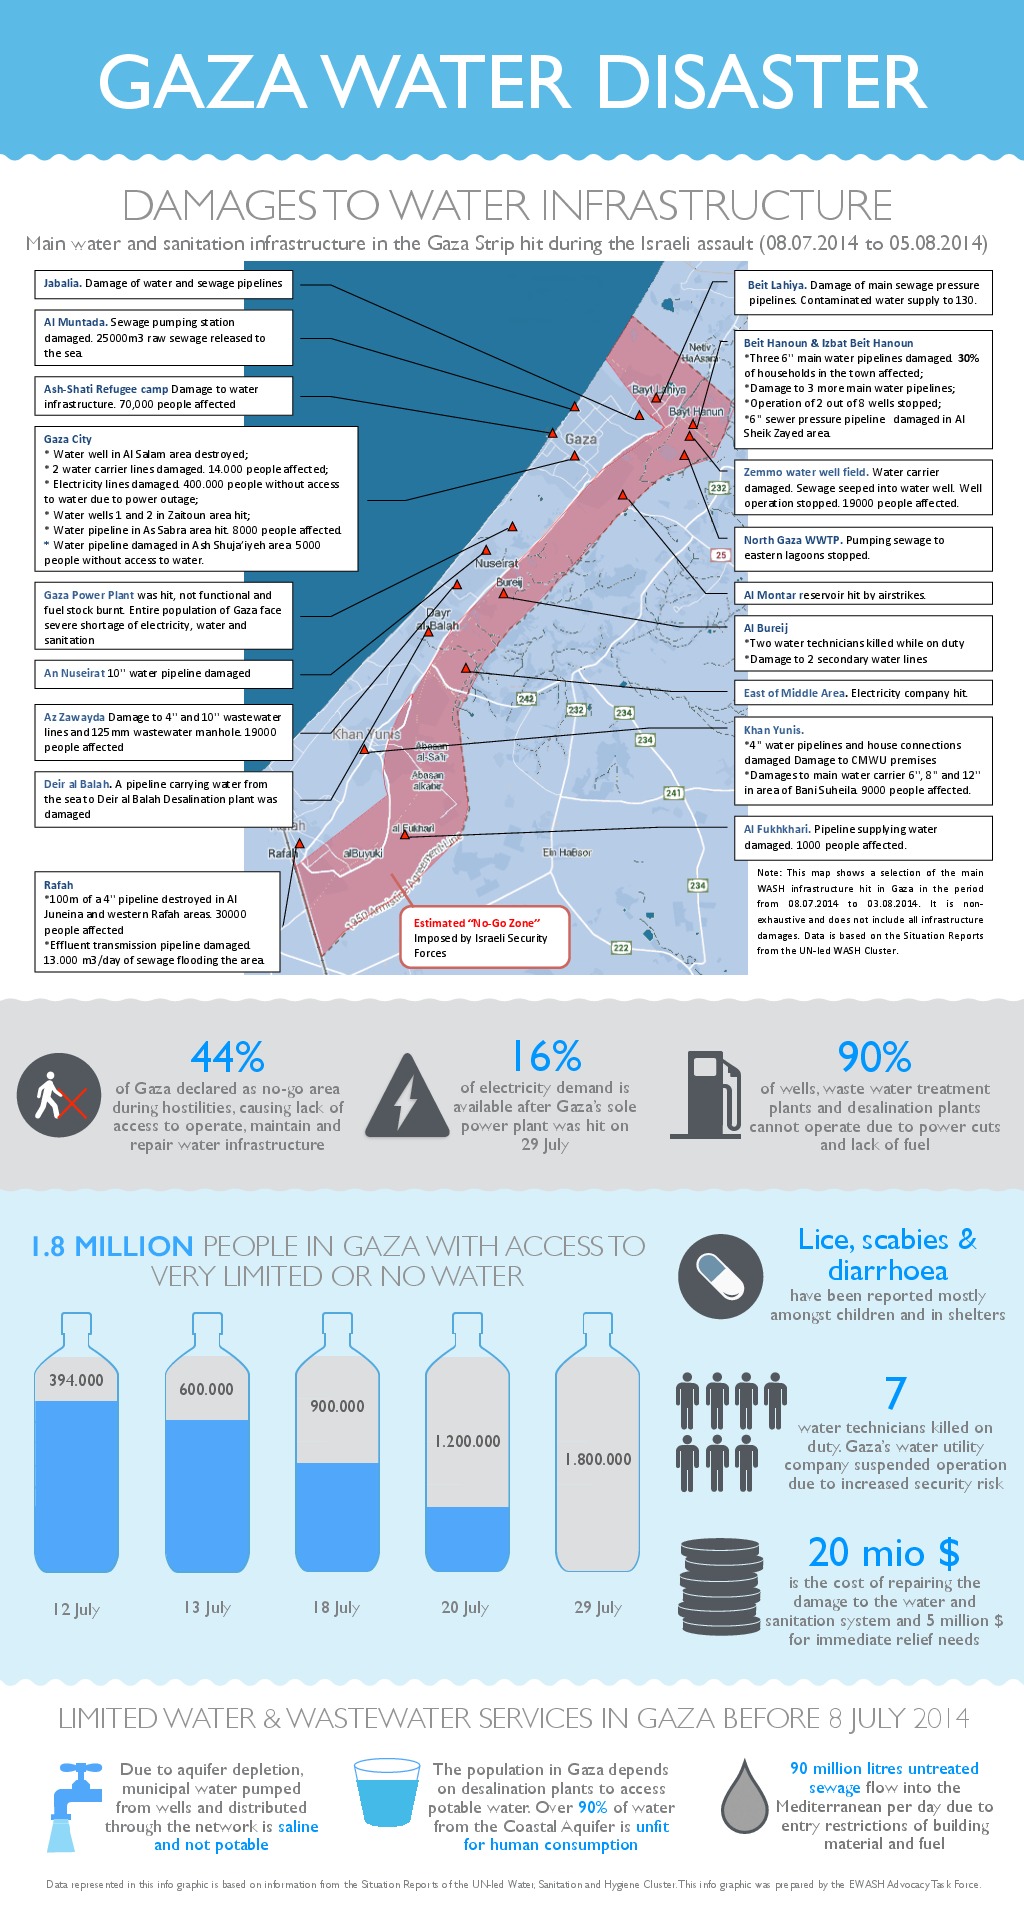 An infographic by EWASH about the crisis in Gaza. Very Insightful.